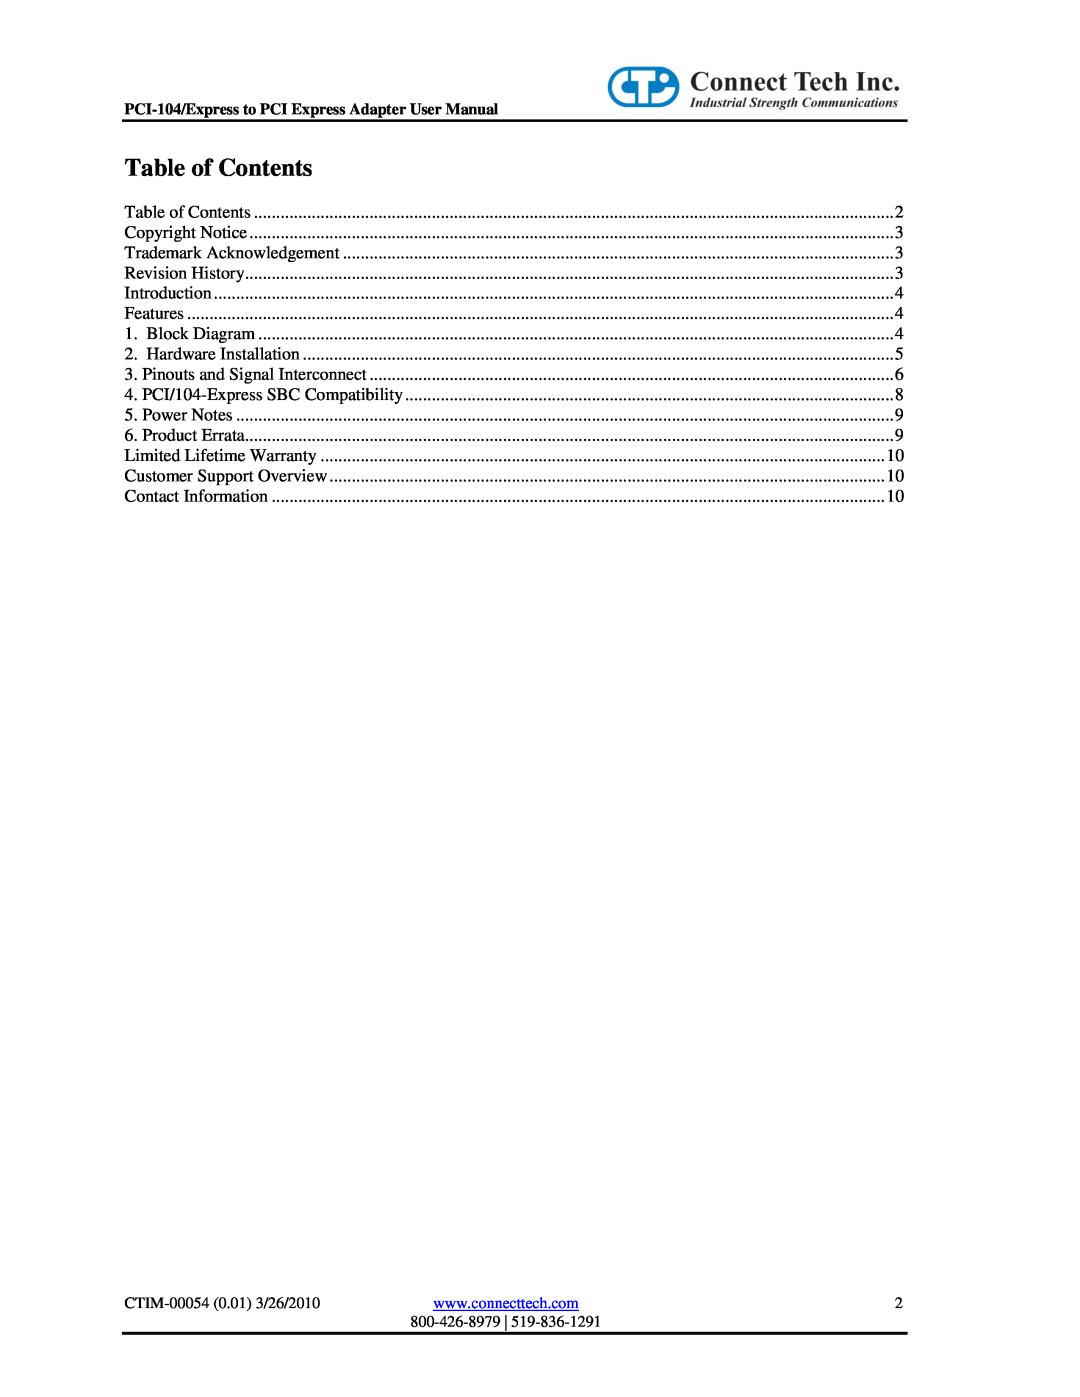 Connect Tech CTIM-00054 user manual Table of Contents 